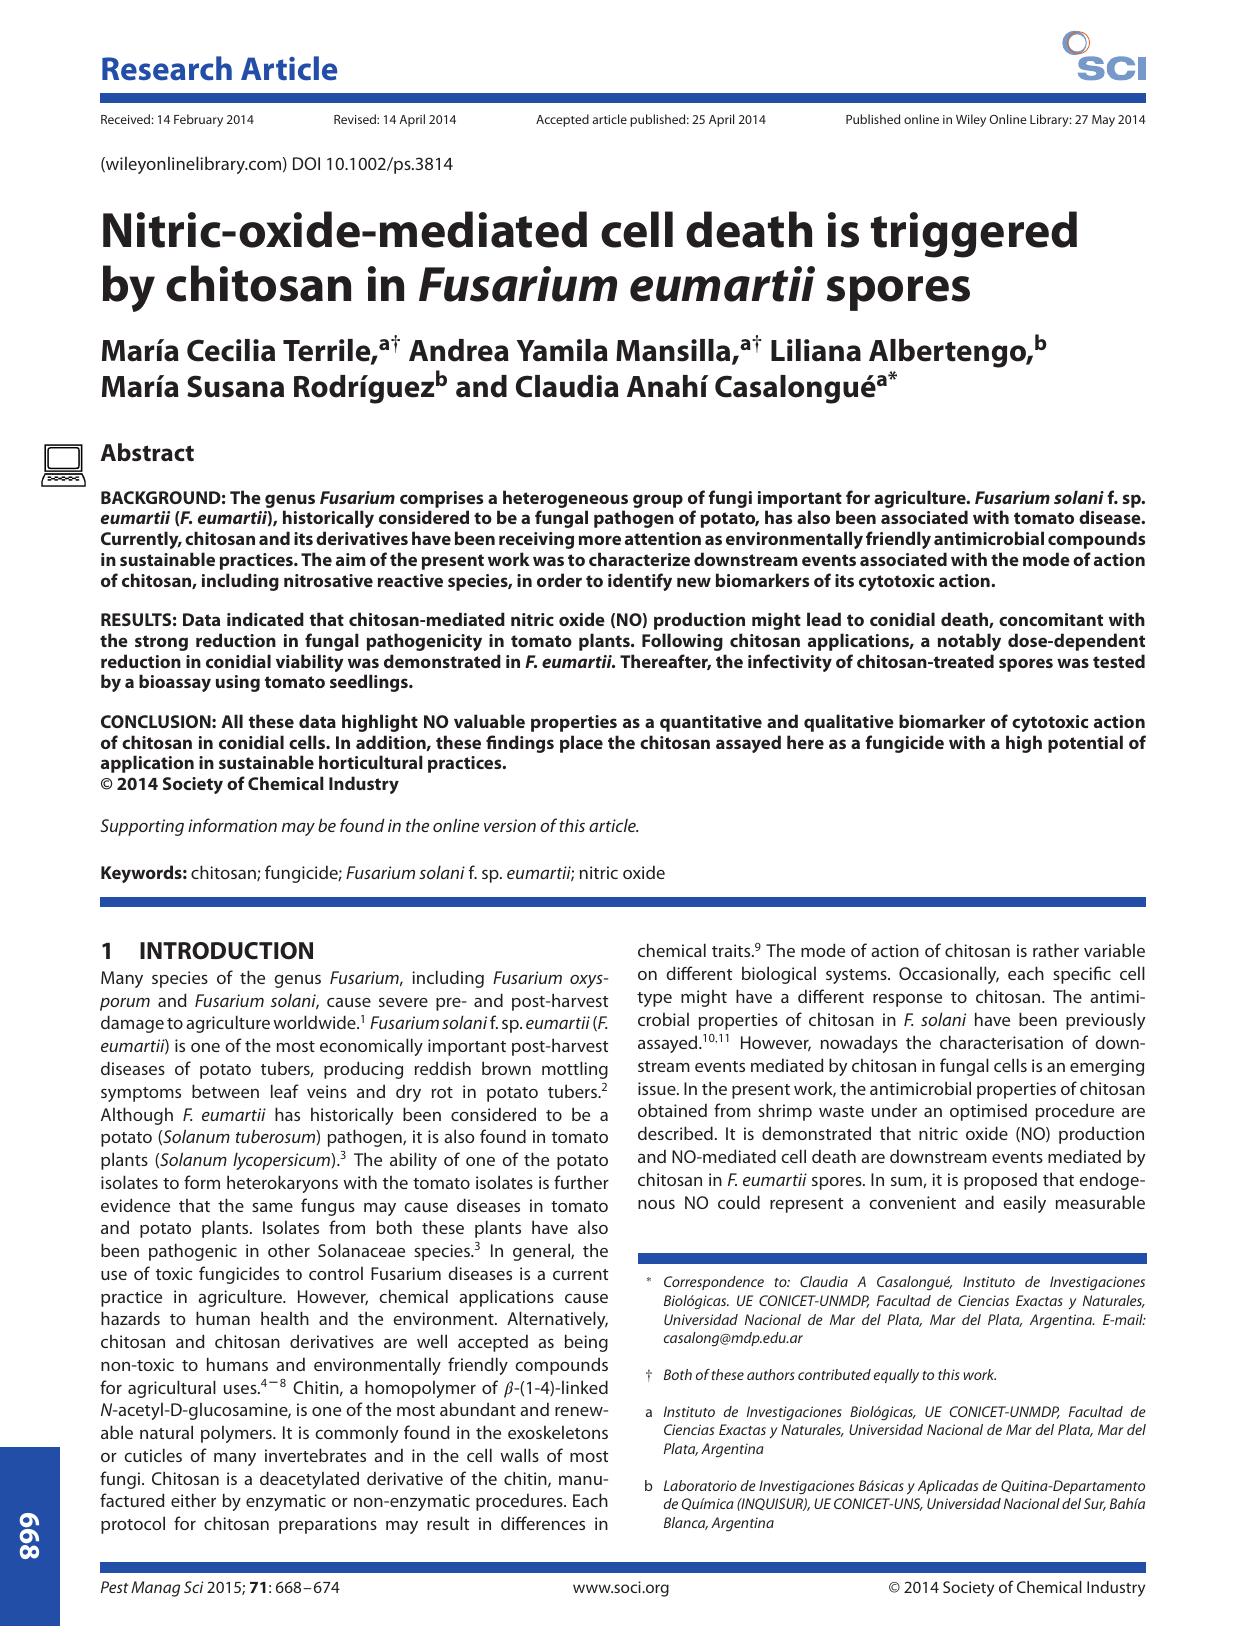 Nitric-oxide-mediated cell death is triggered by chitosan in Fusarium eumartii spores by Unknown